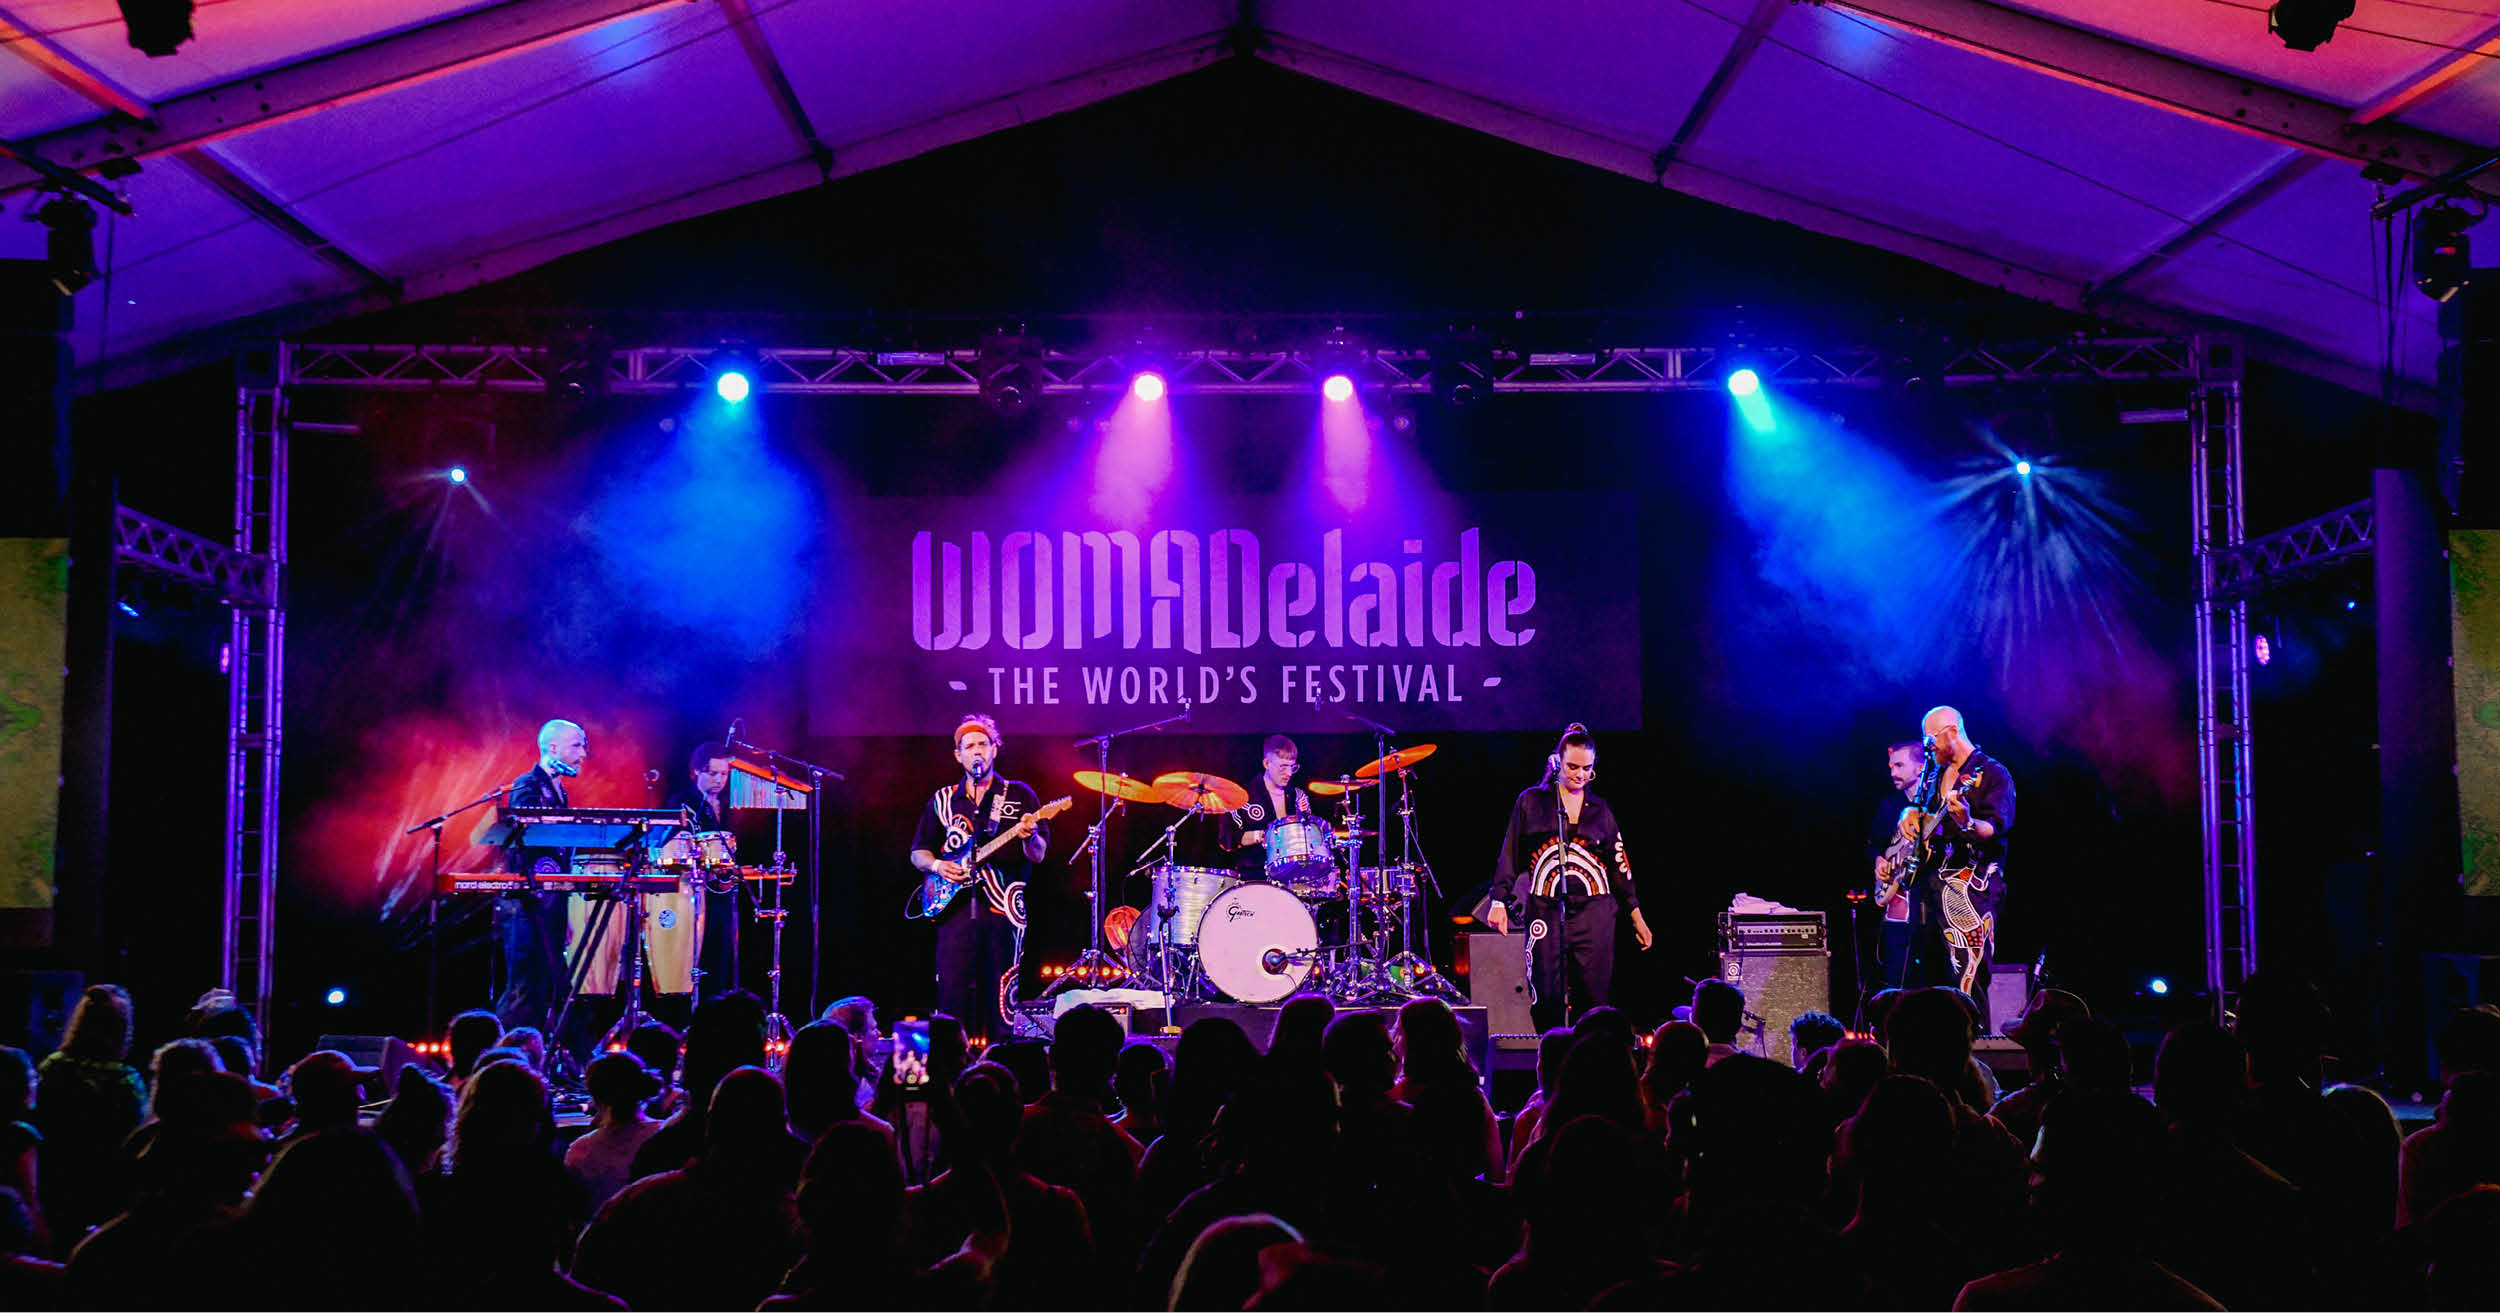 WOMADelaide x NSS Academy